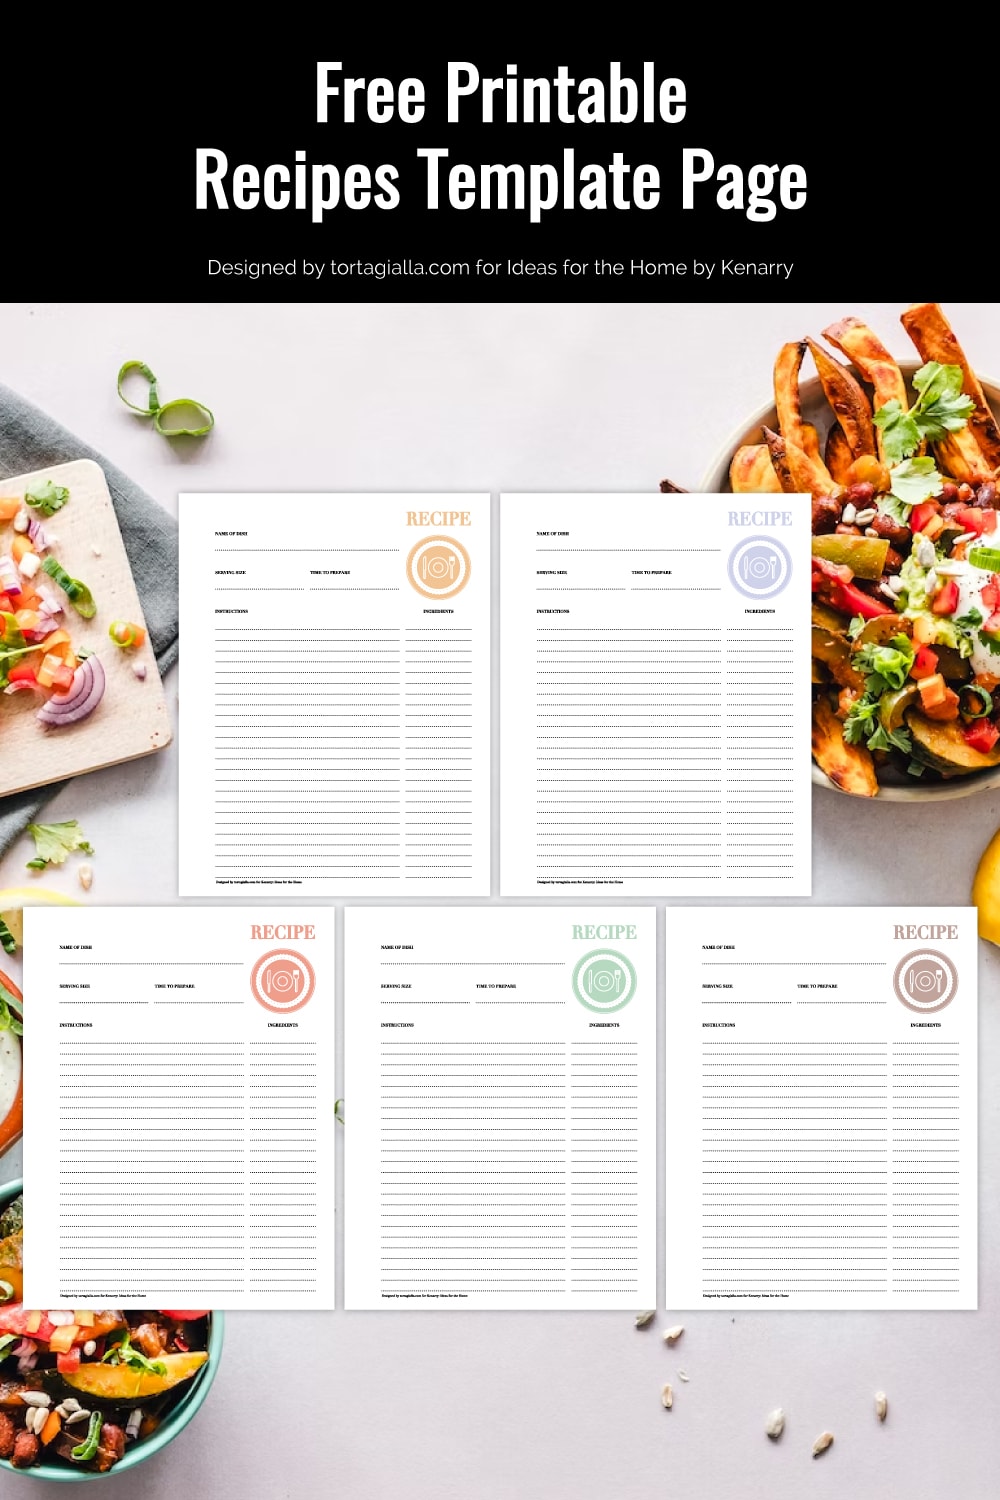 Preview of recipe template page in five colors on top of a kitchen countertop background with multiple dishes and food in bowls.